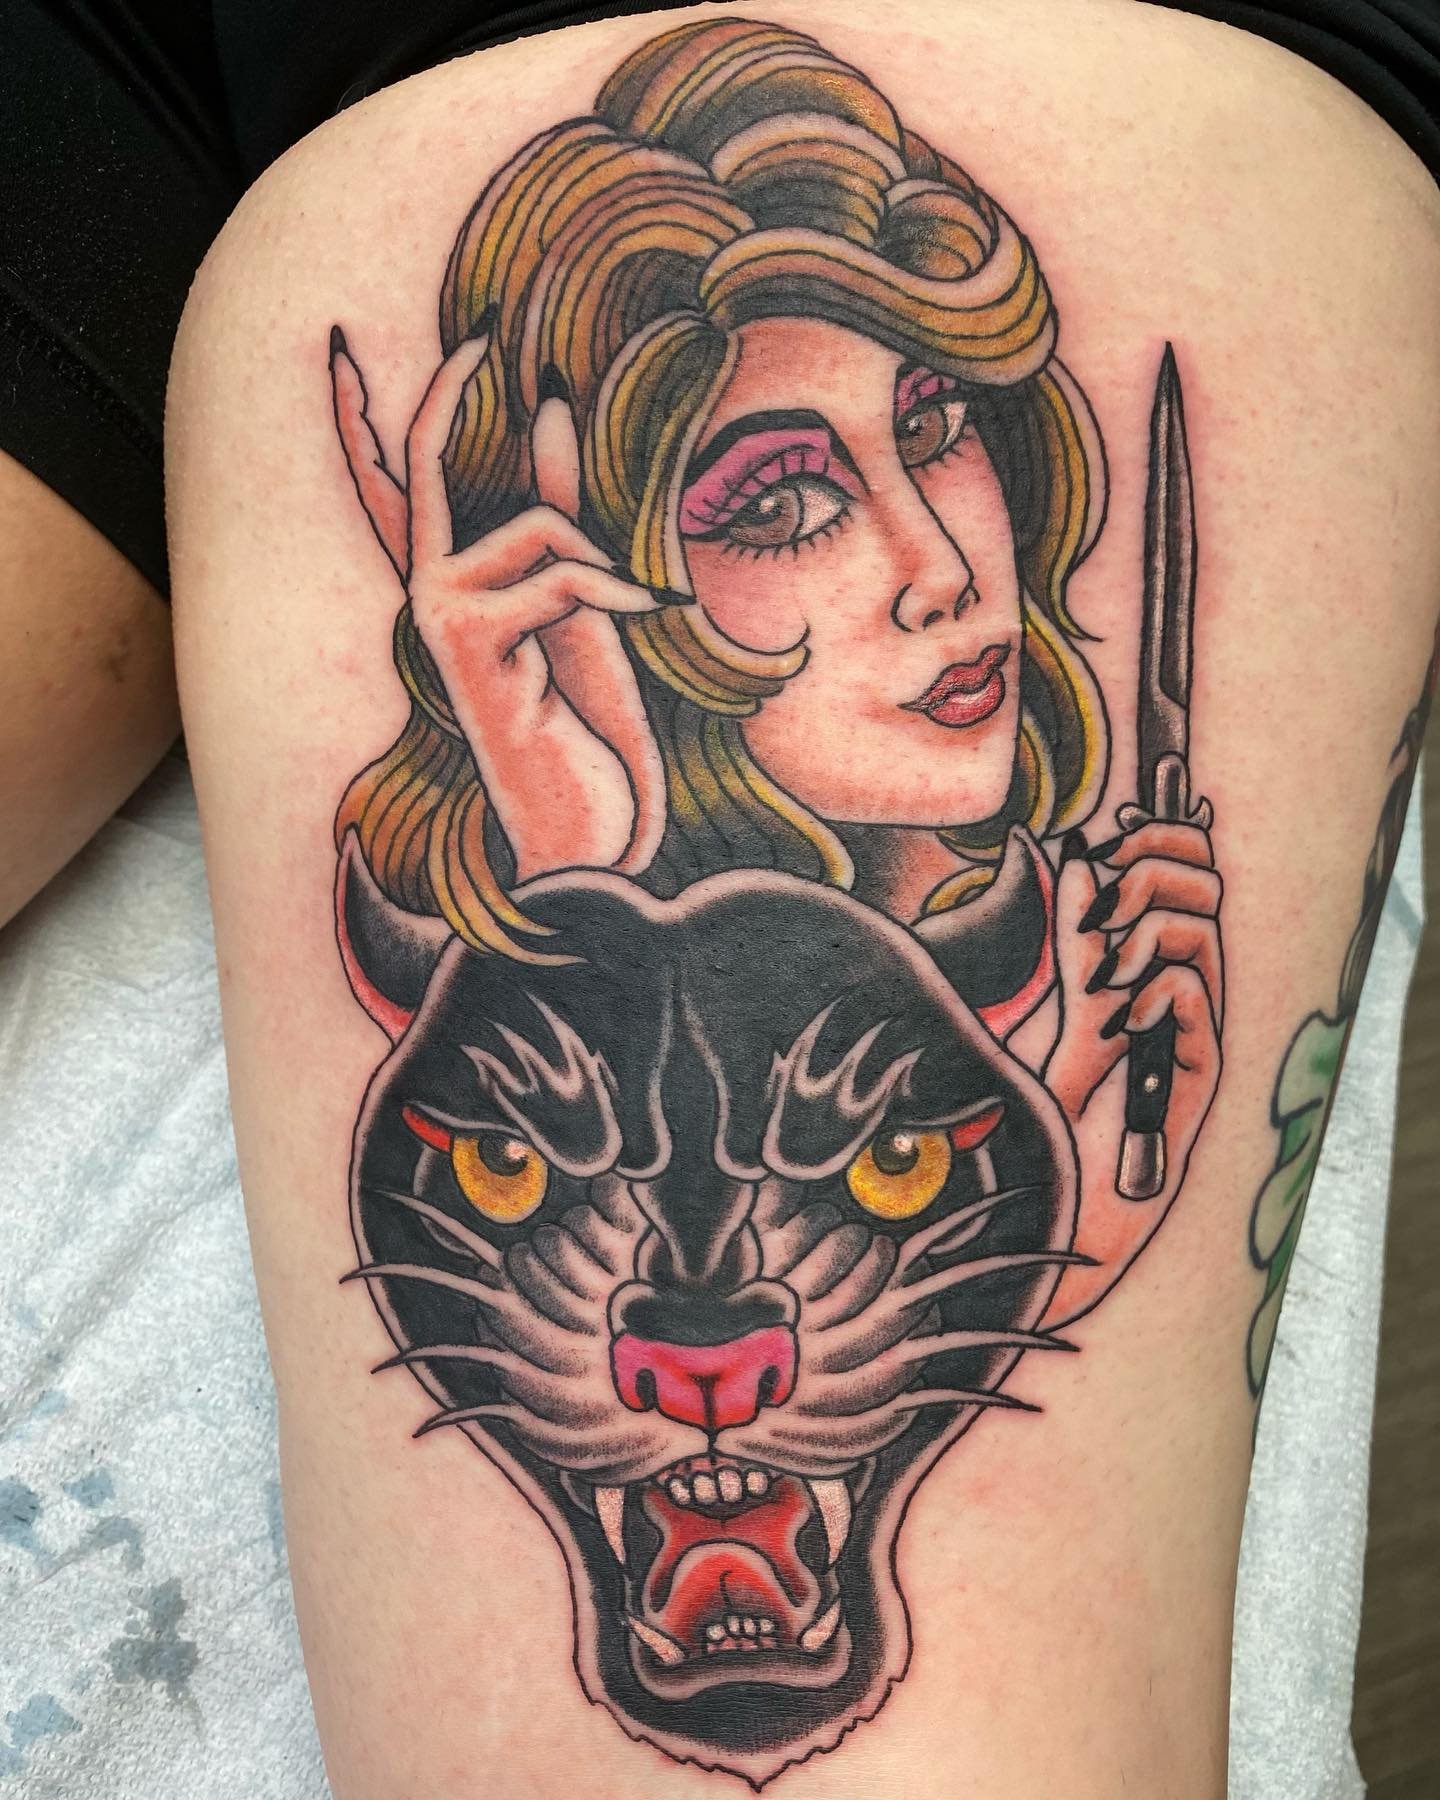 Done by Ant Anderson @antdiggity1972 #antanderson #antandersontattoos #red5va
&bull;
To book with Ant, call the studio for consult times, and information.